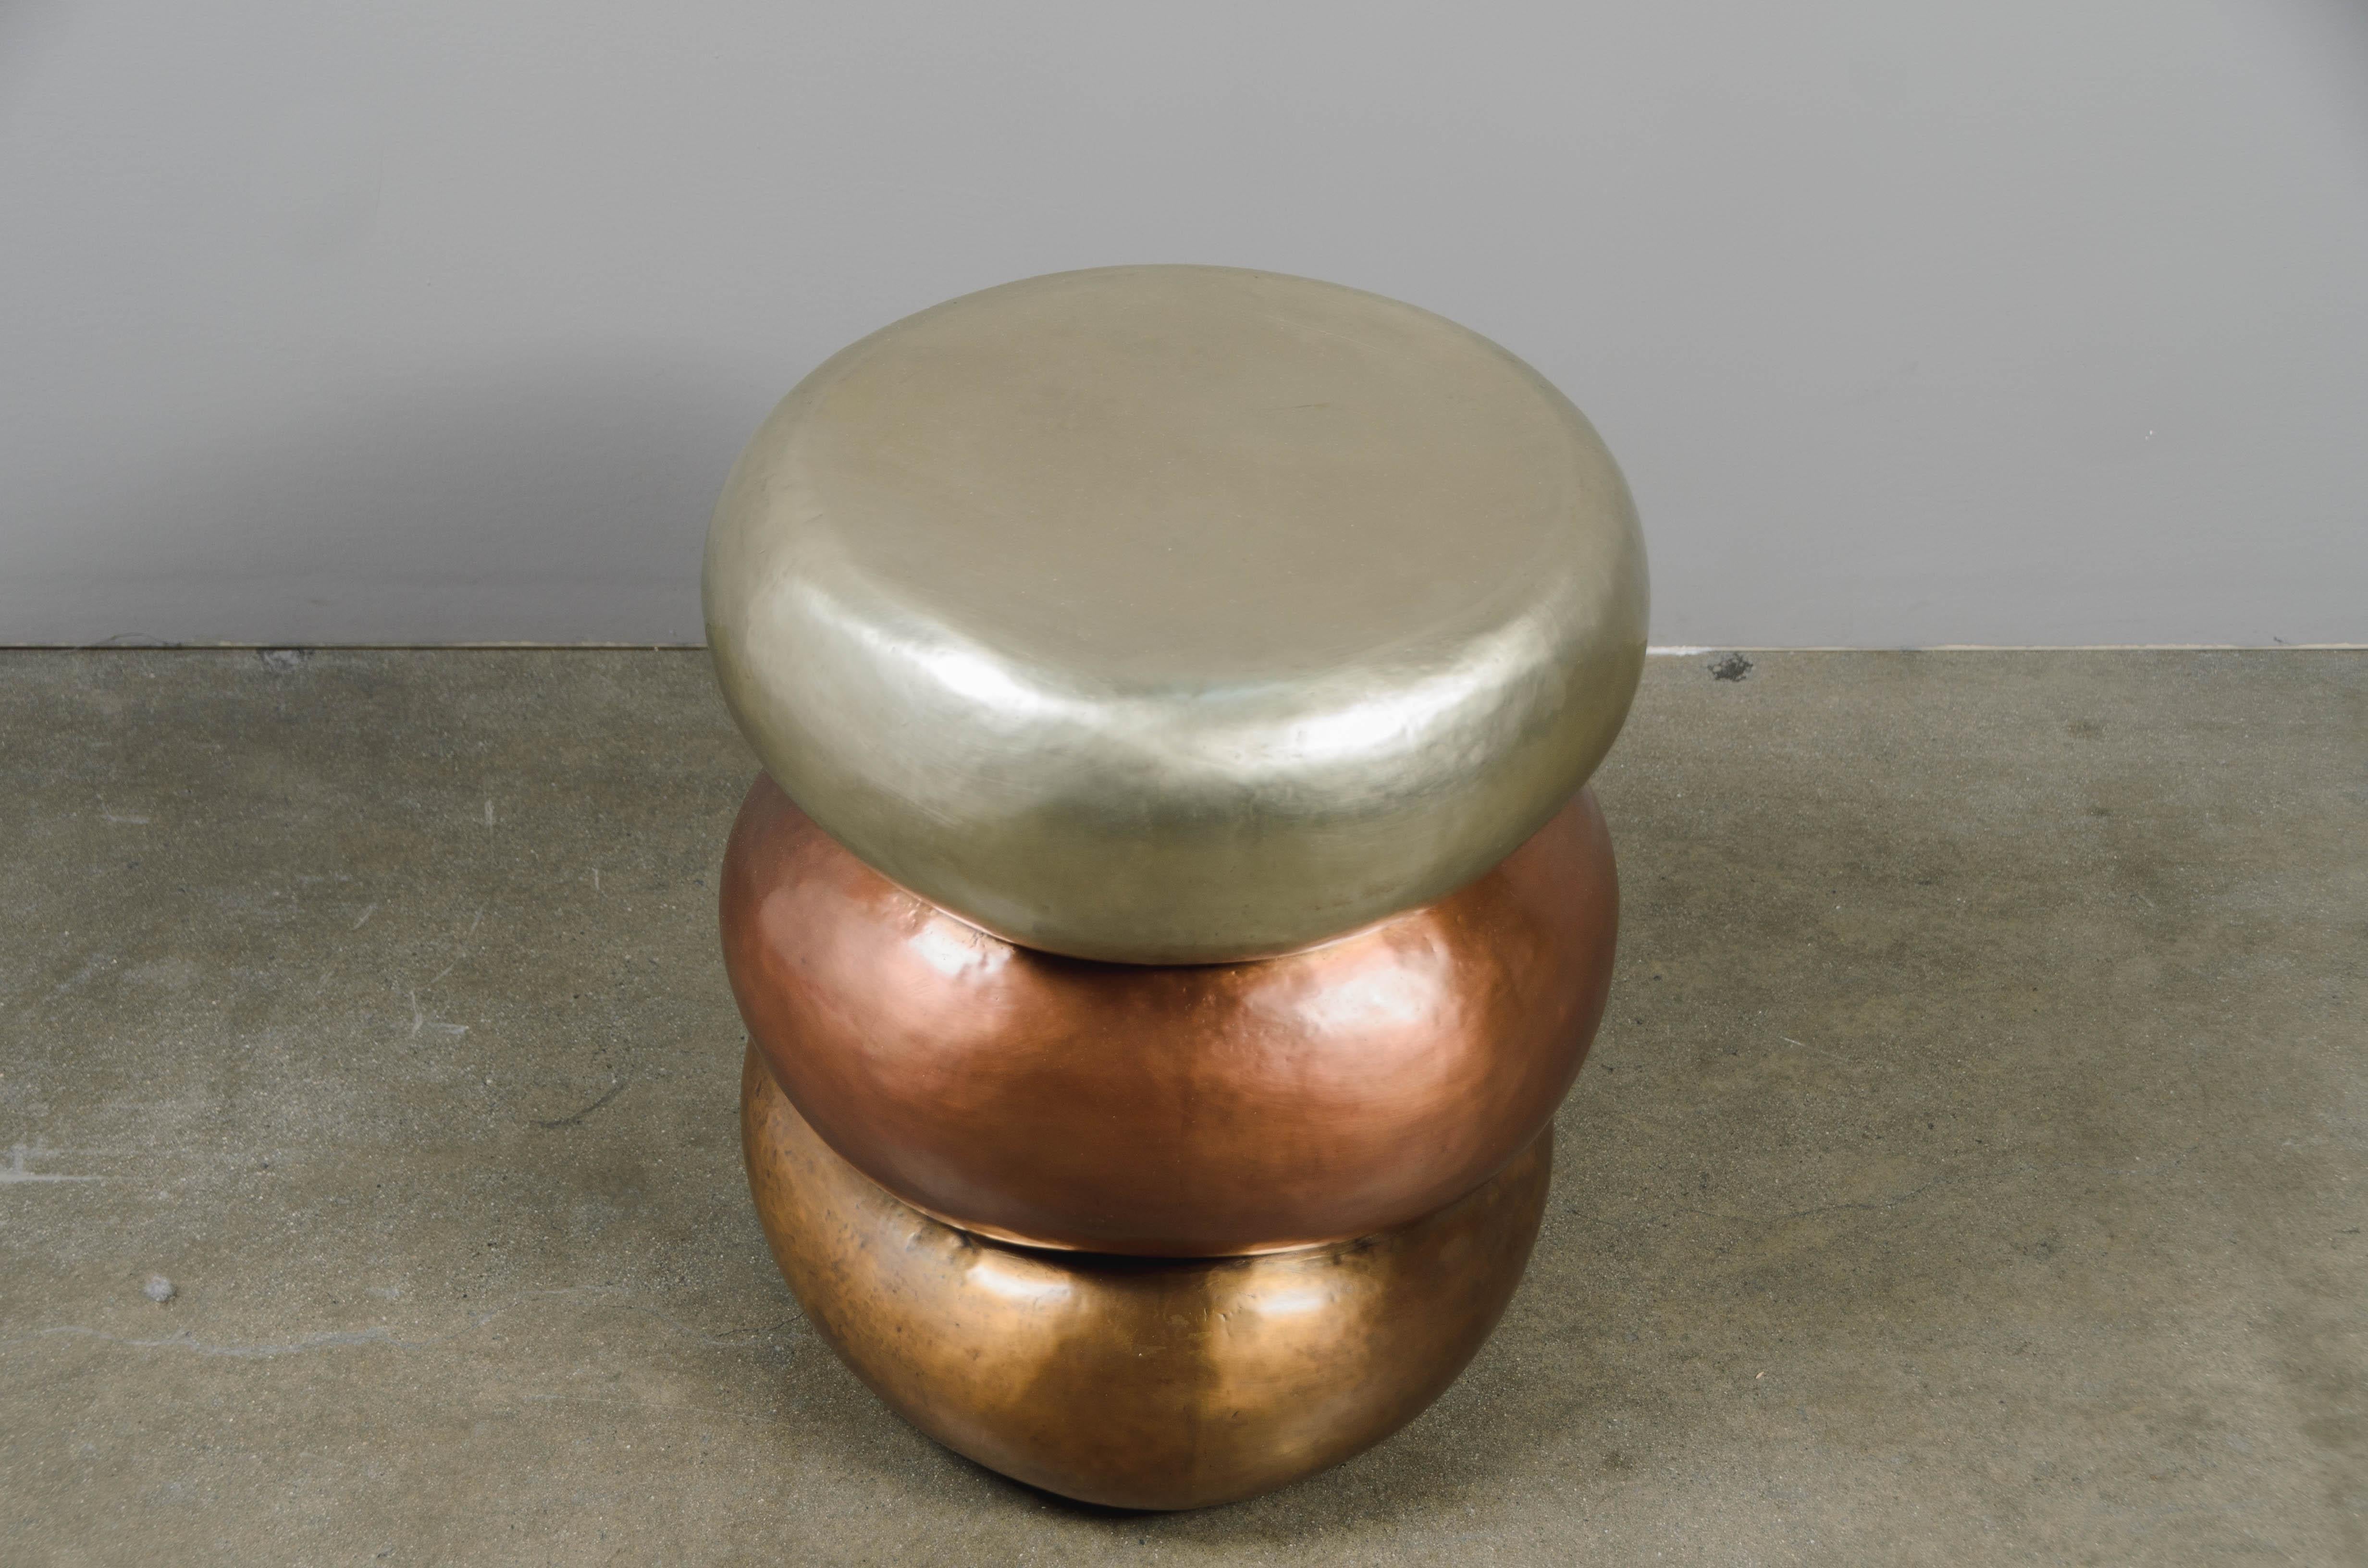 Triple Stacked Drumstool 
White Bronze, Copper and Brass
Hand Repoussé
Limited Edition
Each piece is individually crafted and is unique. 

Repoussé is the traditional art of hand-hammering decorative relief onto sheet metal. The technique originated